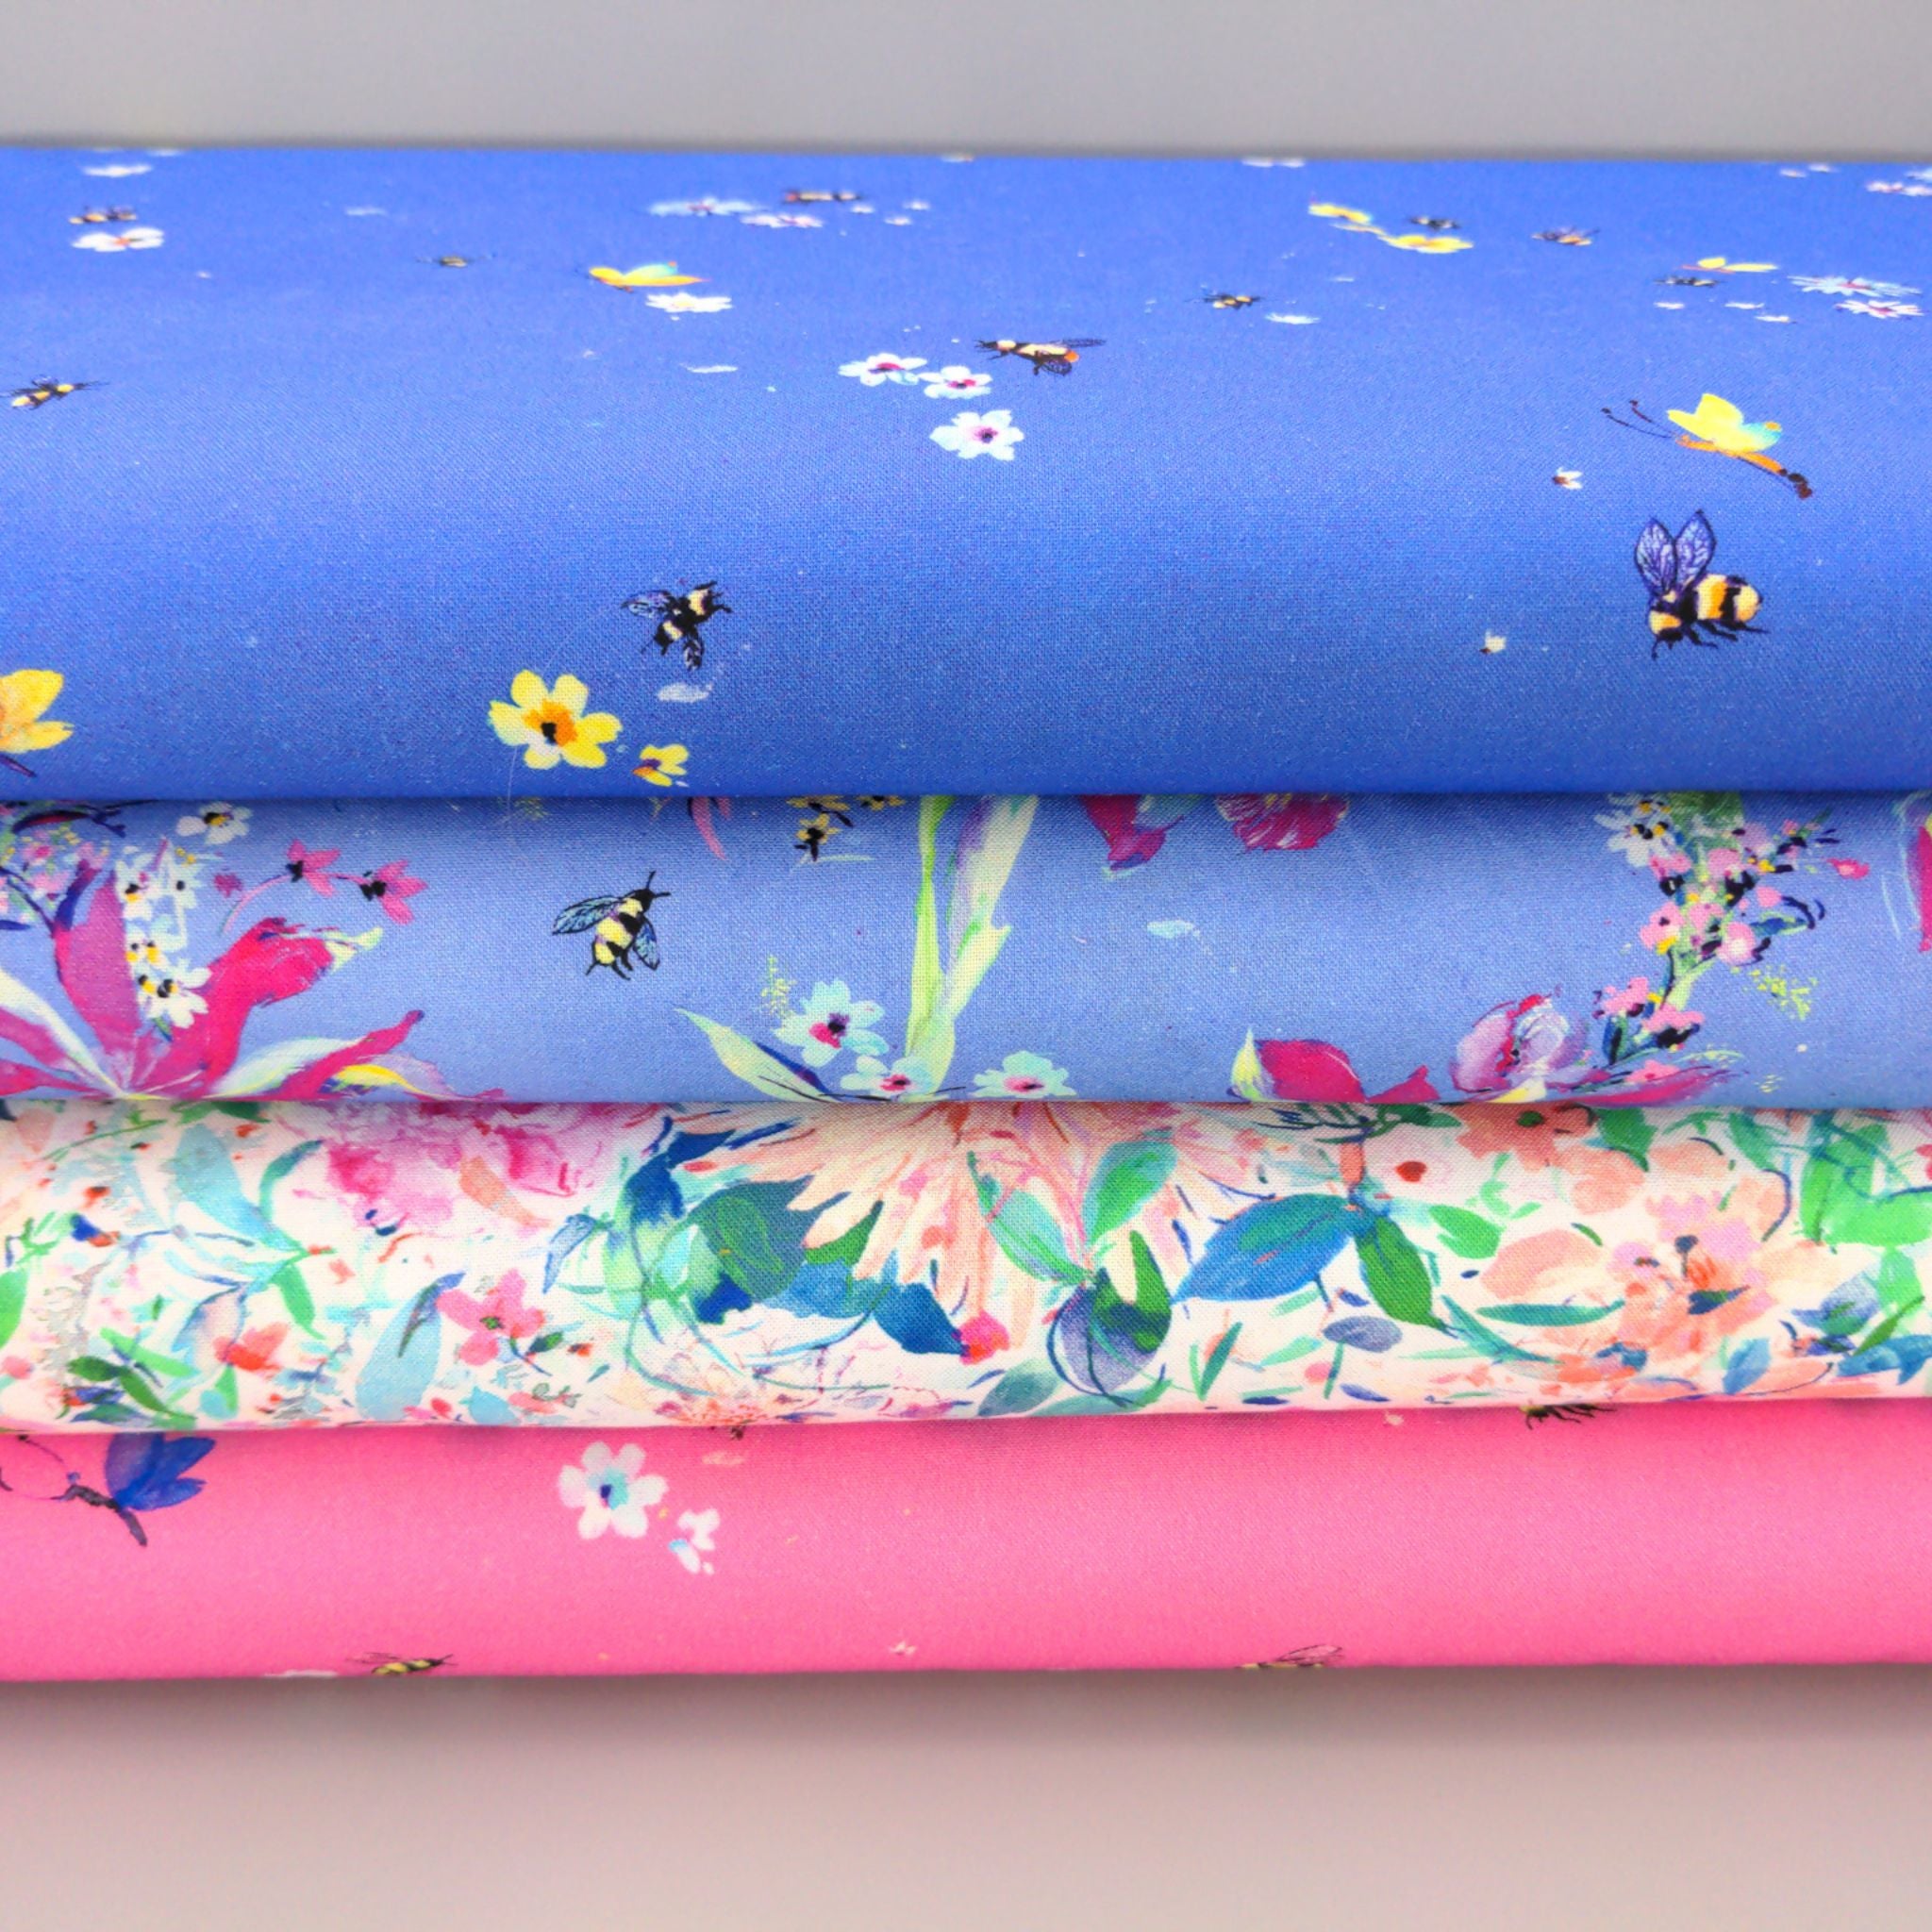 Bees and dragonflies on purple/blue cotton - Bee Free by Robert Kaufman